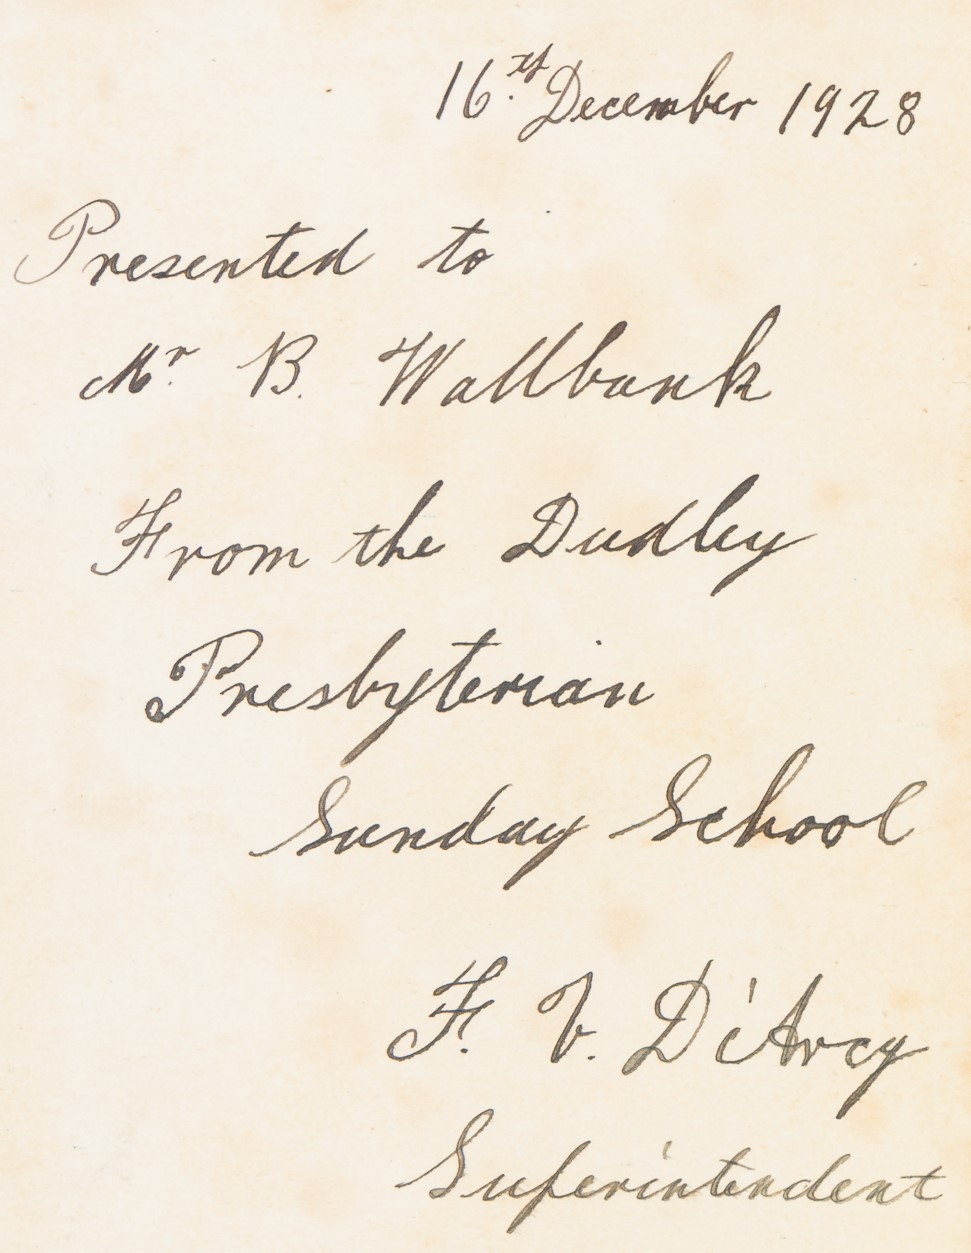 Handwritten cursive which reads: "16th December 1928. Presented to Mr. B. Wallbank From the Dudley Presbyterian Secondary School. F.V. D'Arcy, Superintendent."